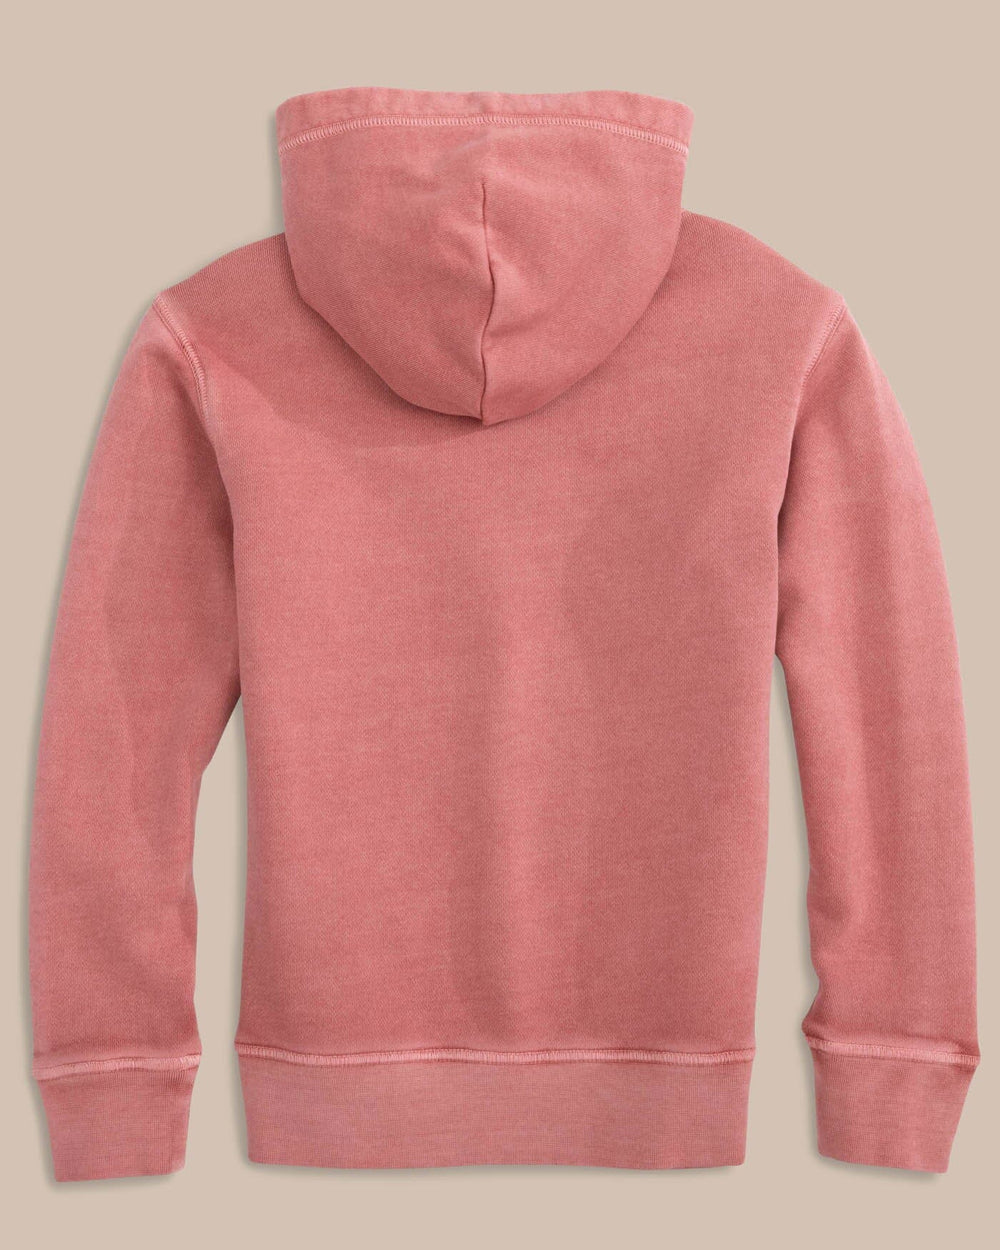 The back view of the Southern Tide Kids Sun Farer Upper Deck Long Sleeve Hoodie by Southern Tide - Dusty Coral